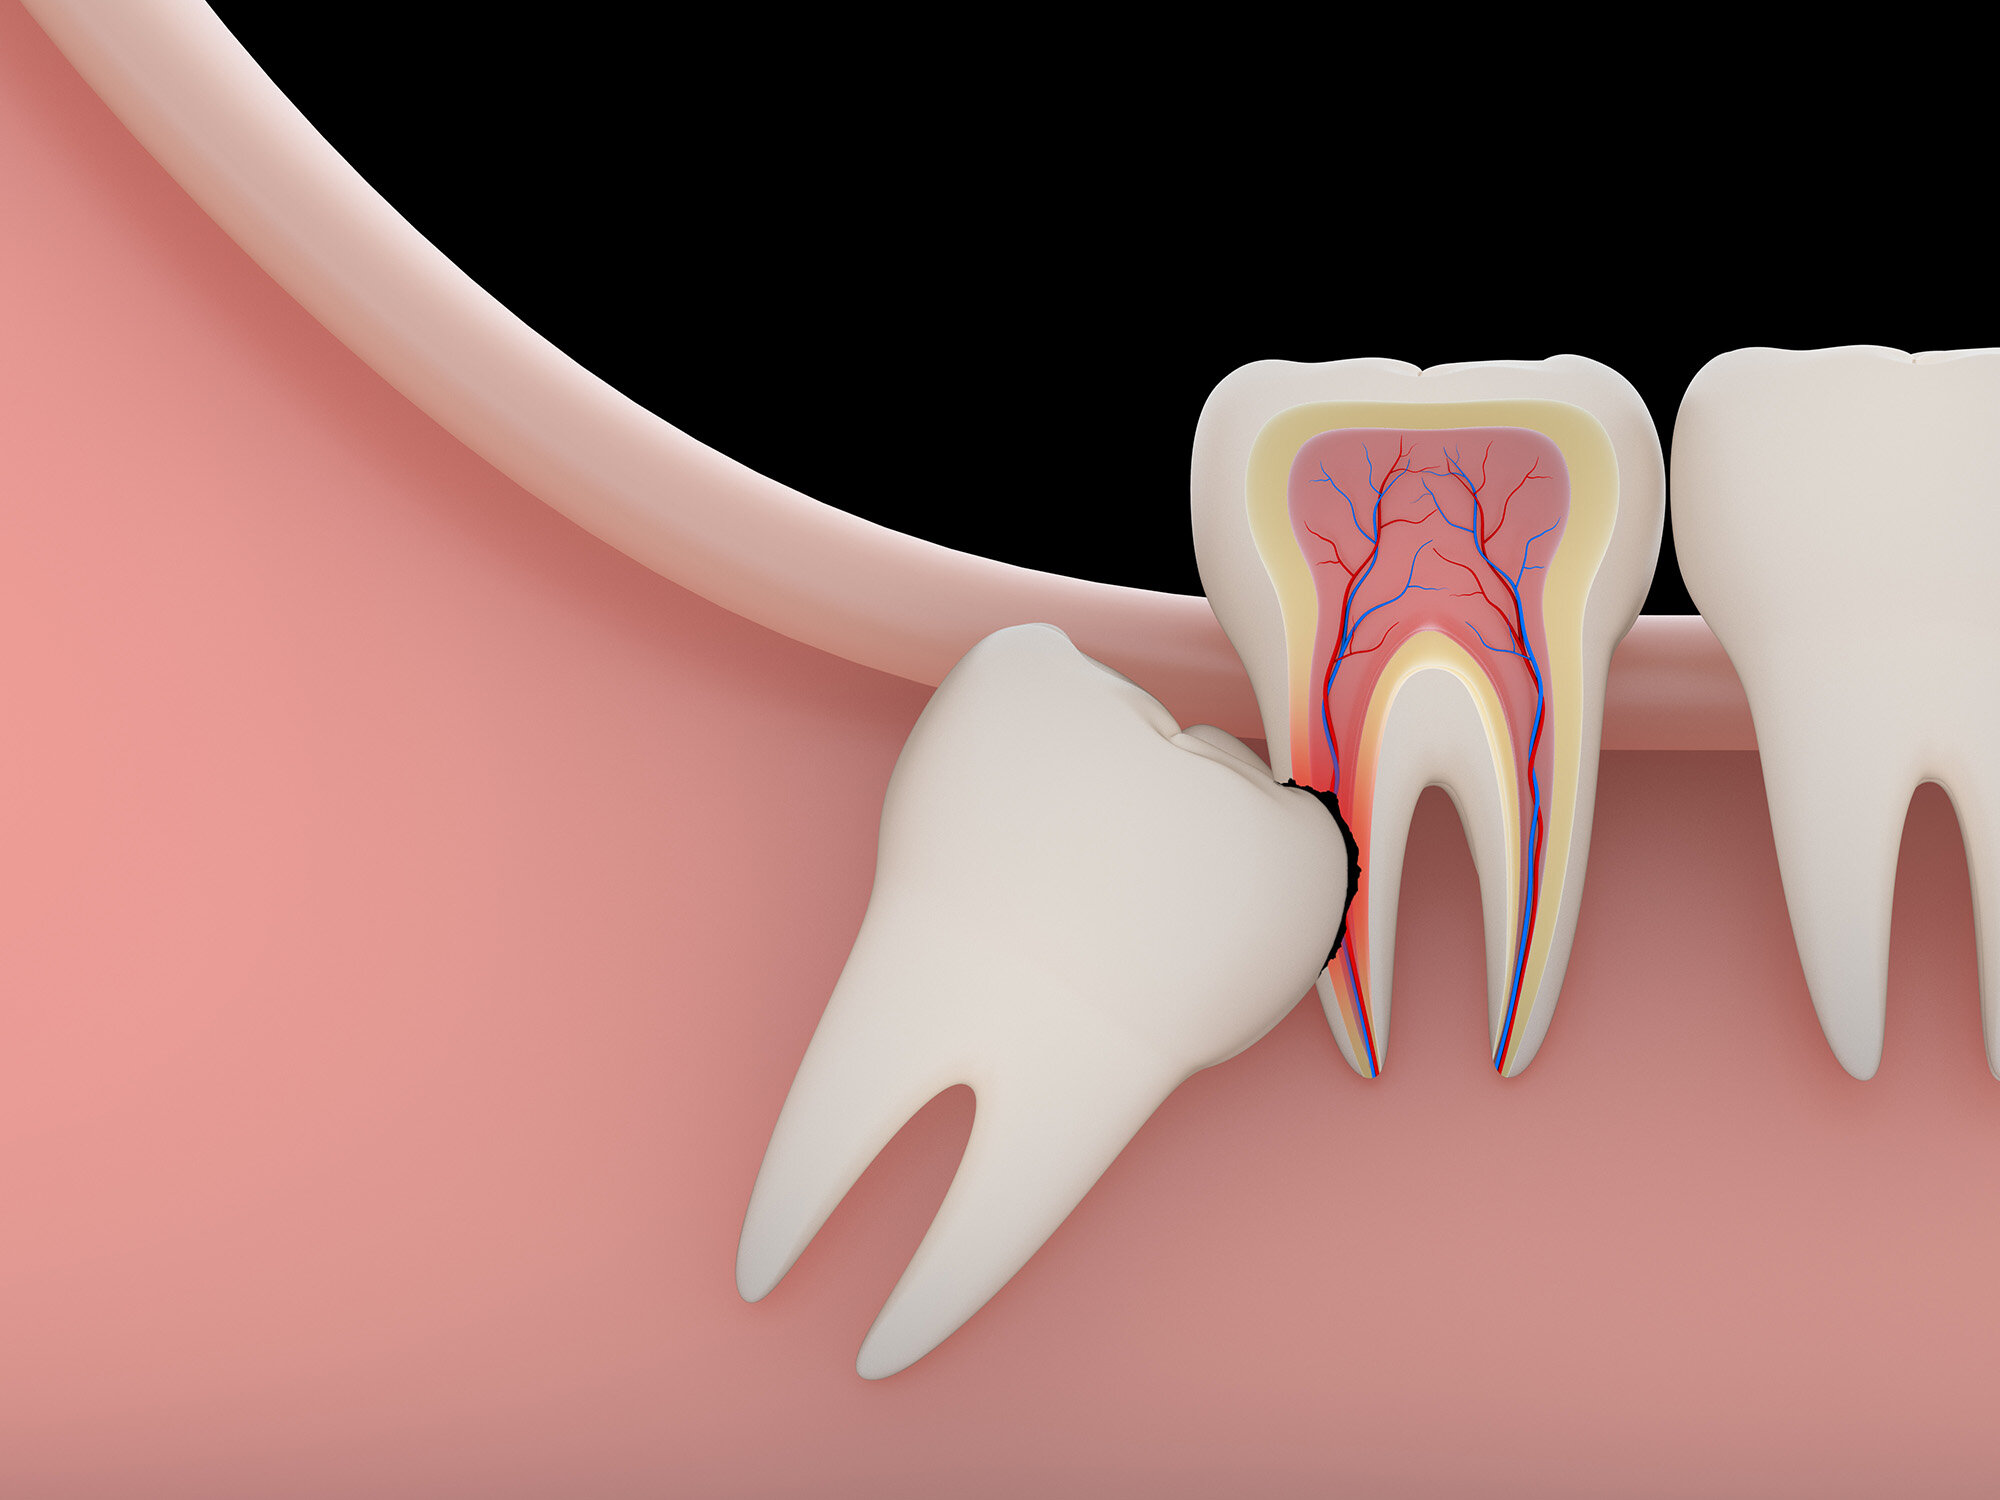 Why Get Impacted Wisdom Teeth Removed If You Feel Fine? Find Out!